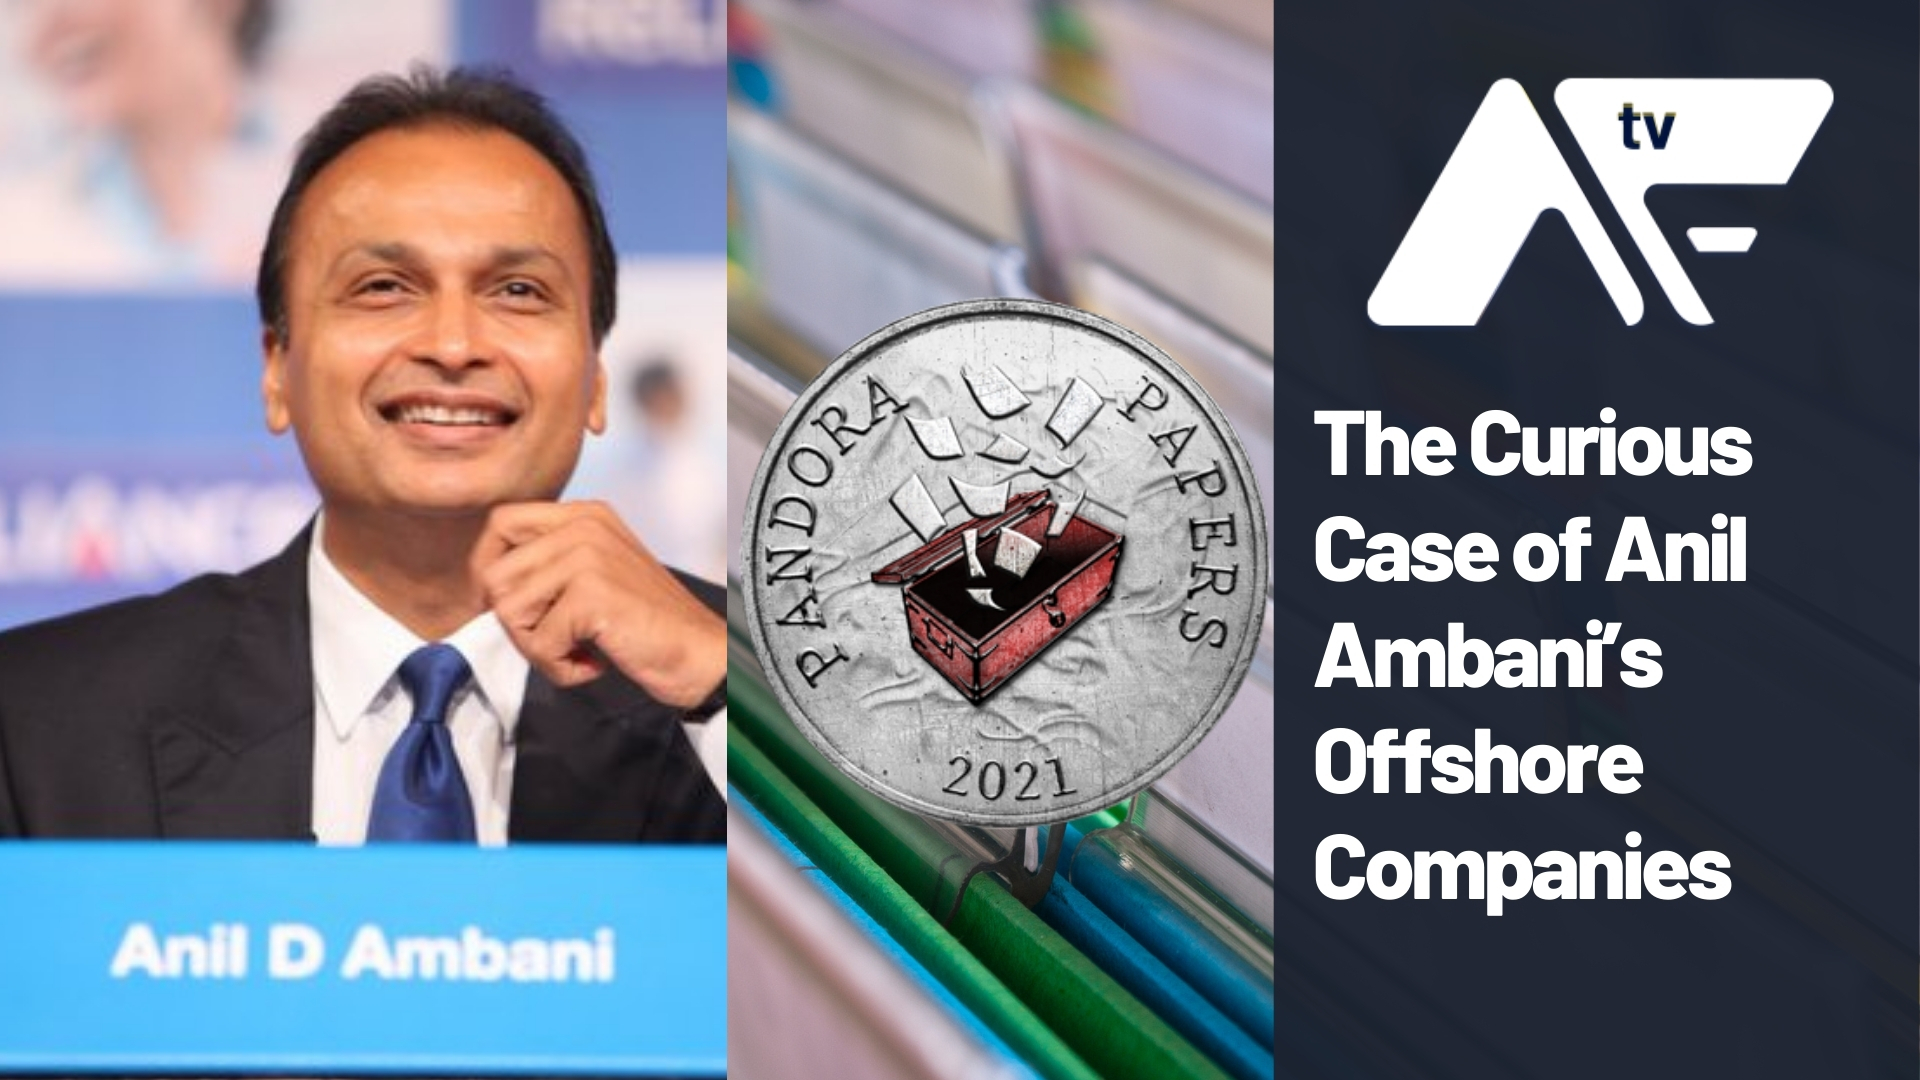 AF TV – The Curious Case of Anil Ambani’s Offshore Companies